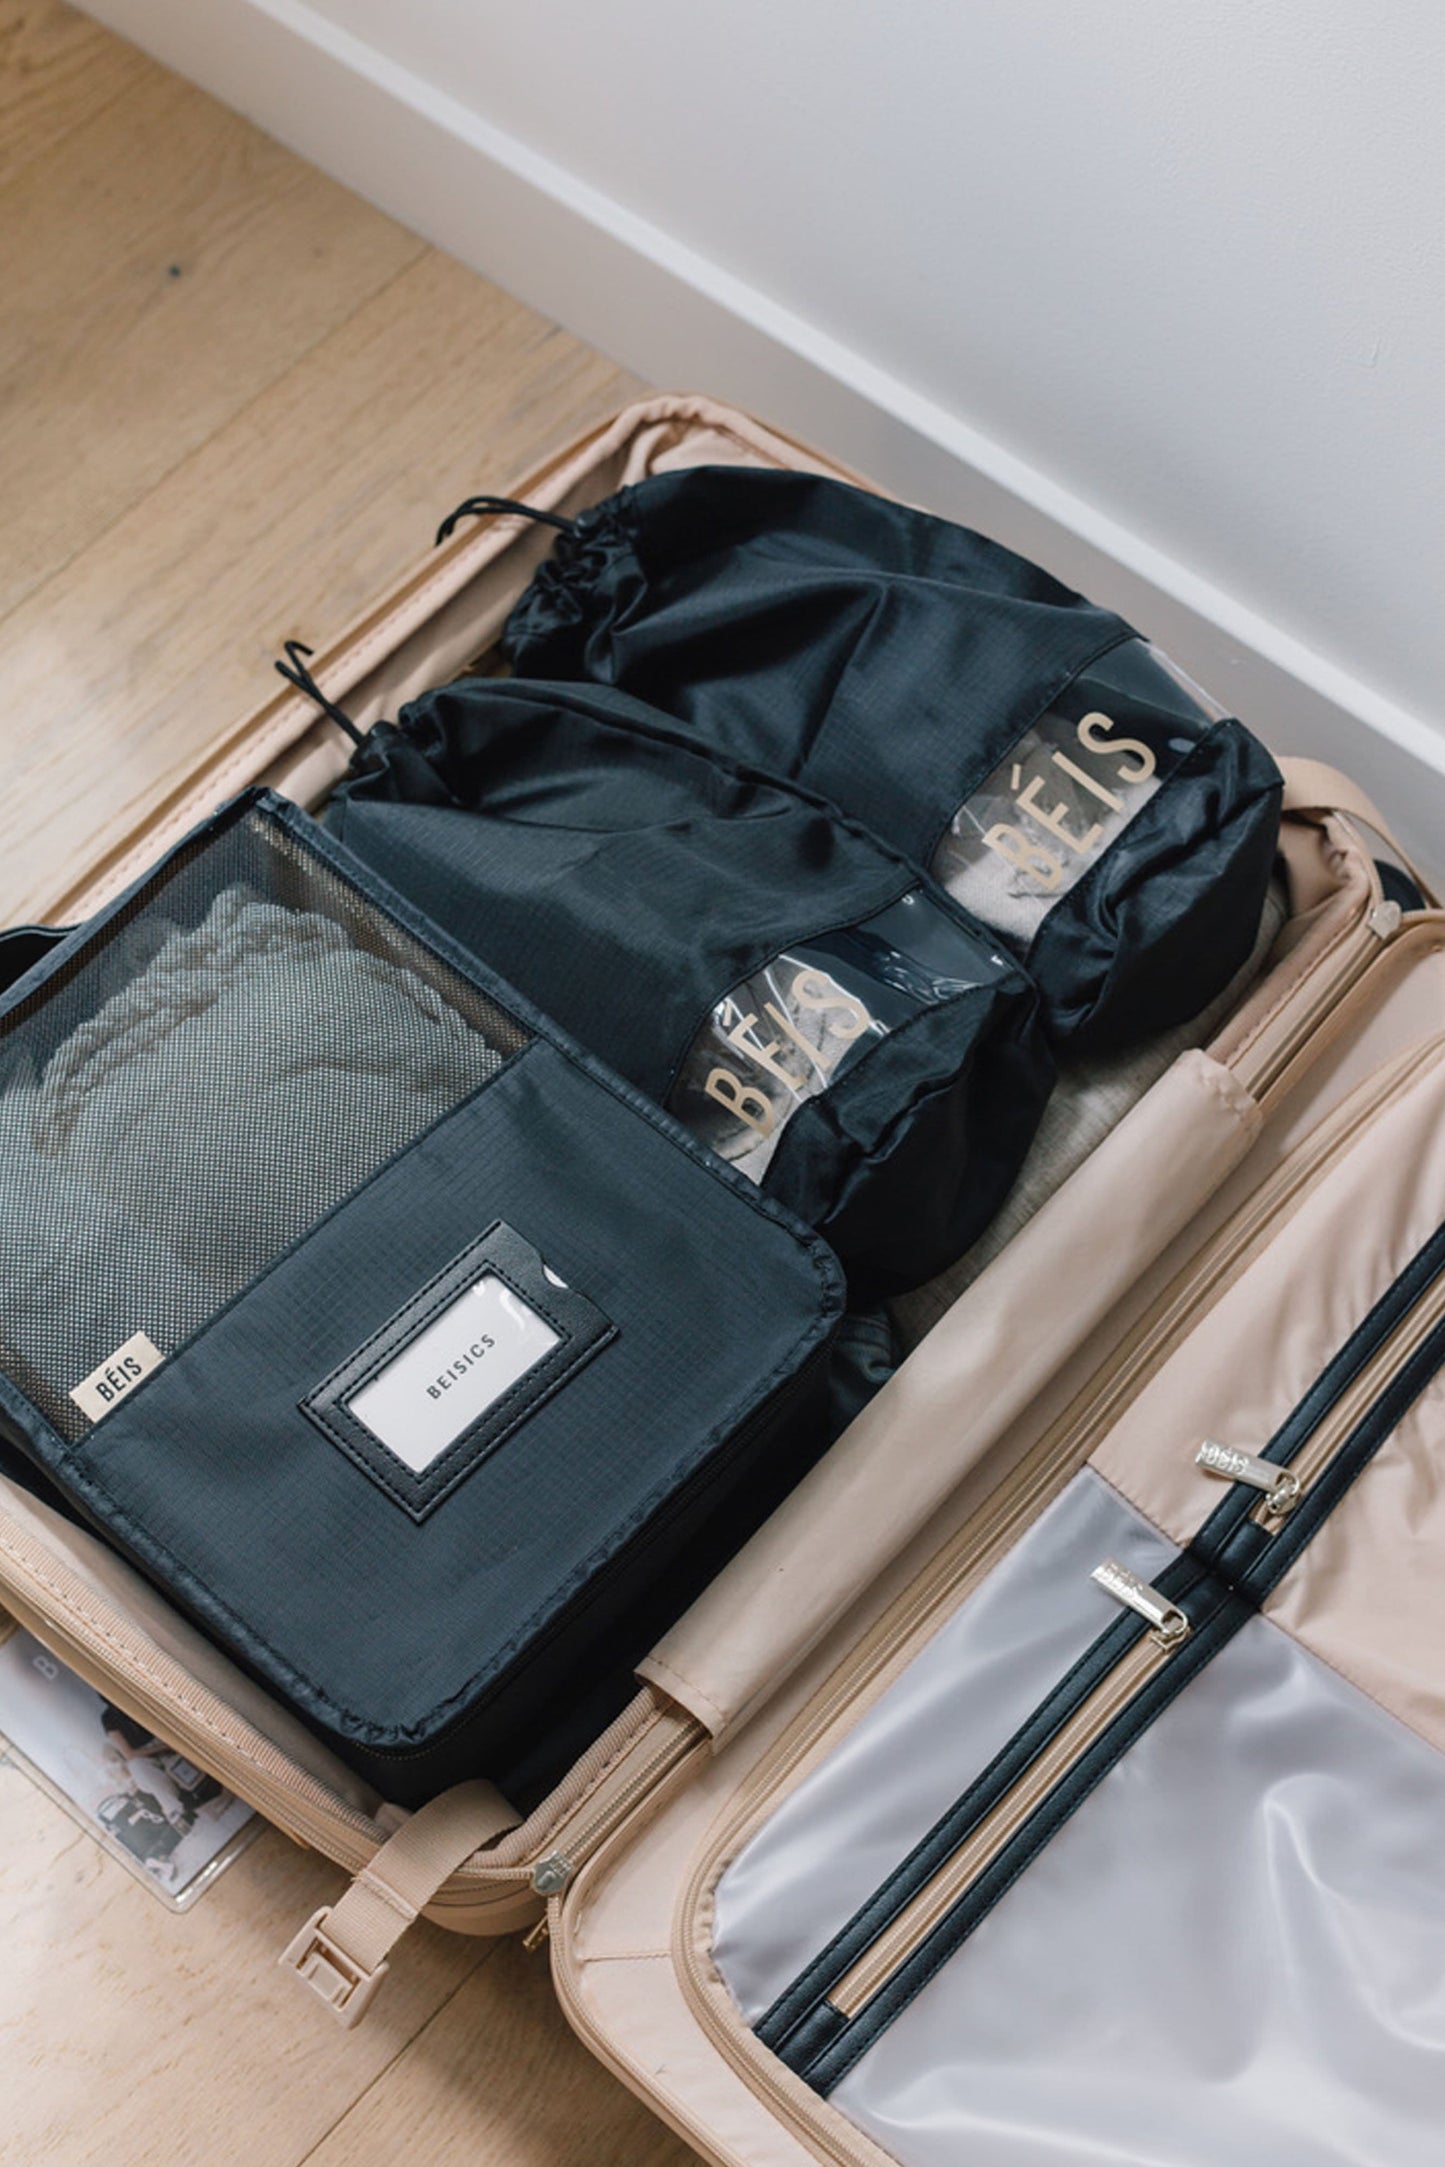 Packing Cubes Black Packed into Beige Suitcase